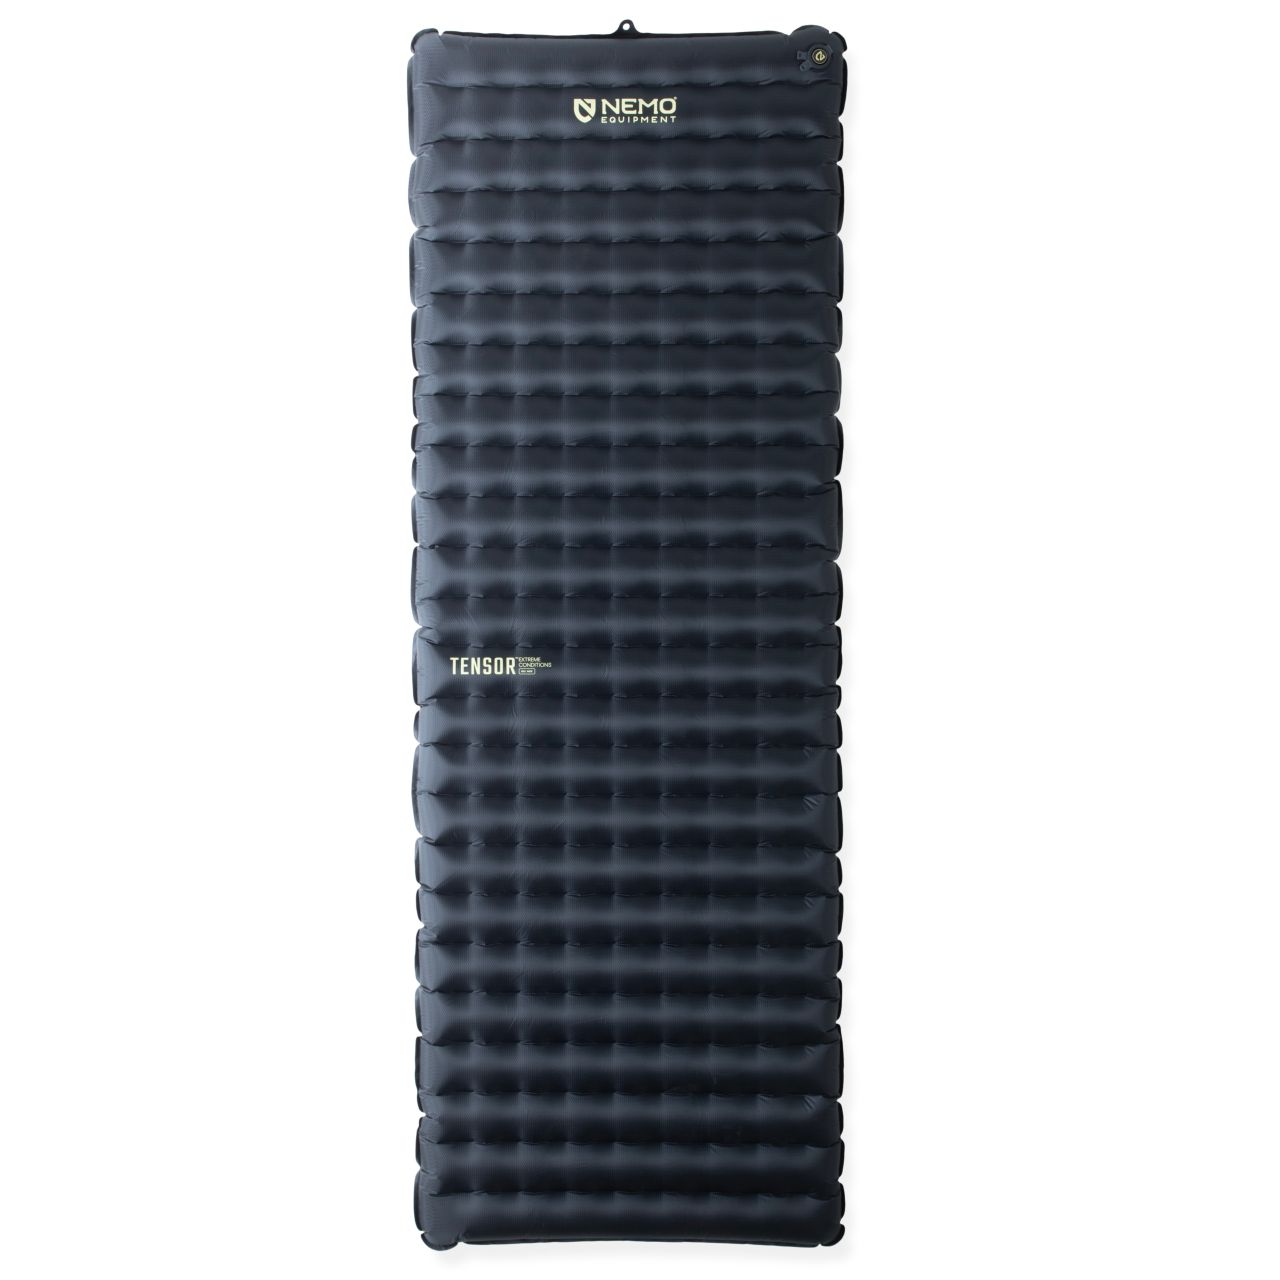 NEMO Tensor Extreme Conditions Ultralight Insulated Pad | Air Pads 